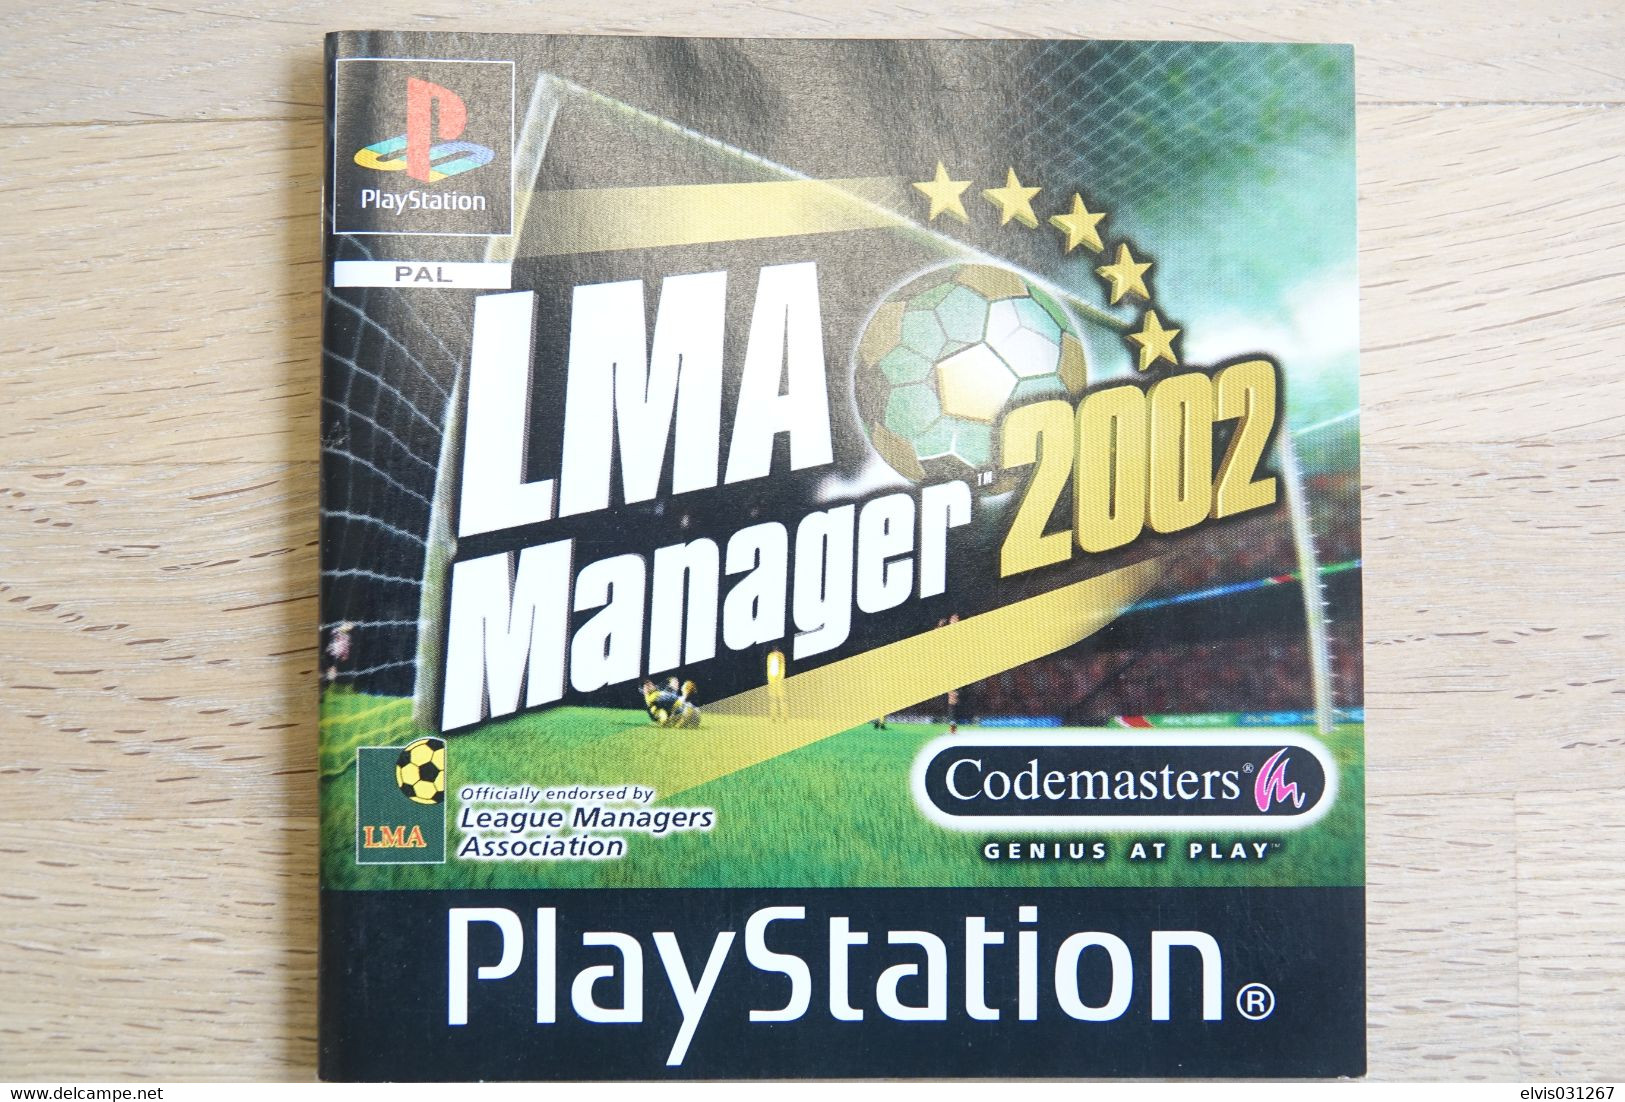 SONY PLAYSTATION ONE PS1 : MANUAL : LMA FOOTBALL MANAGER 2002 - PAL - Literature & Instructions